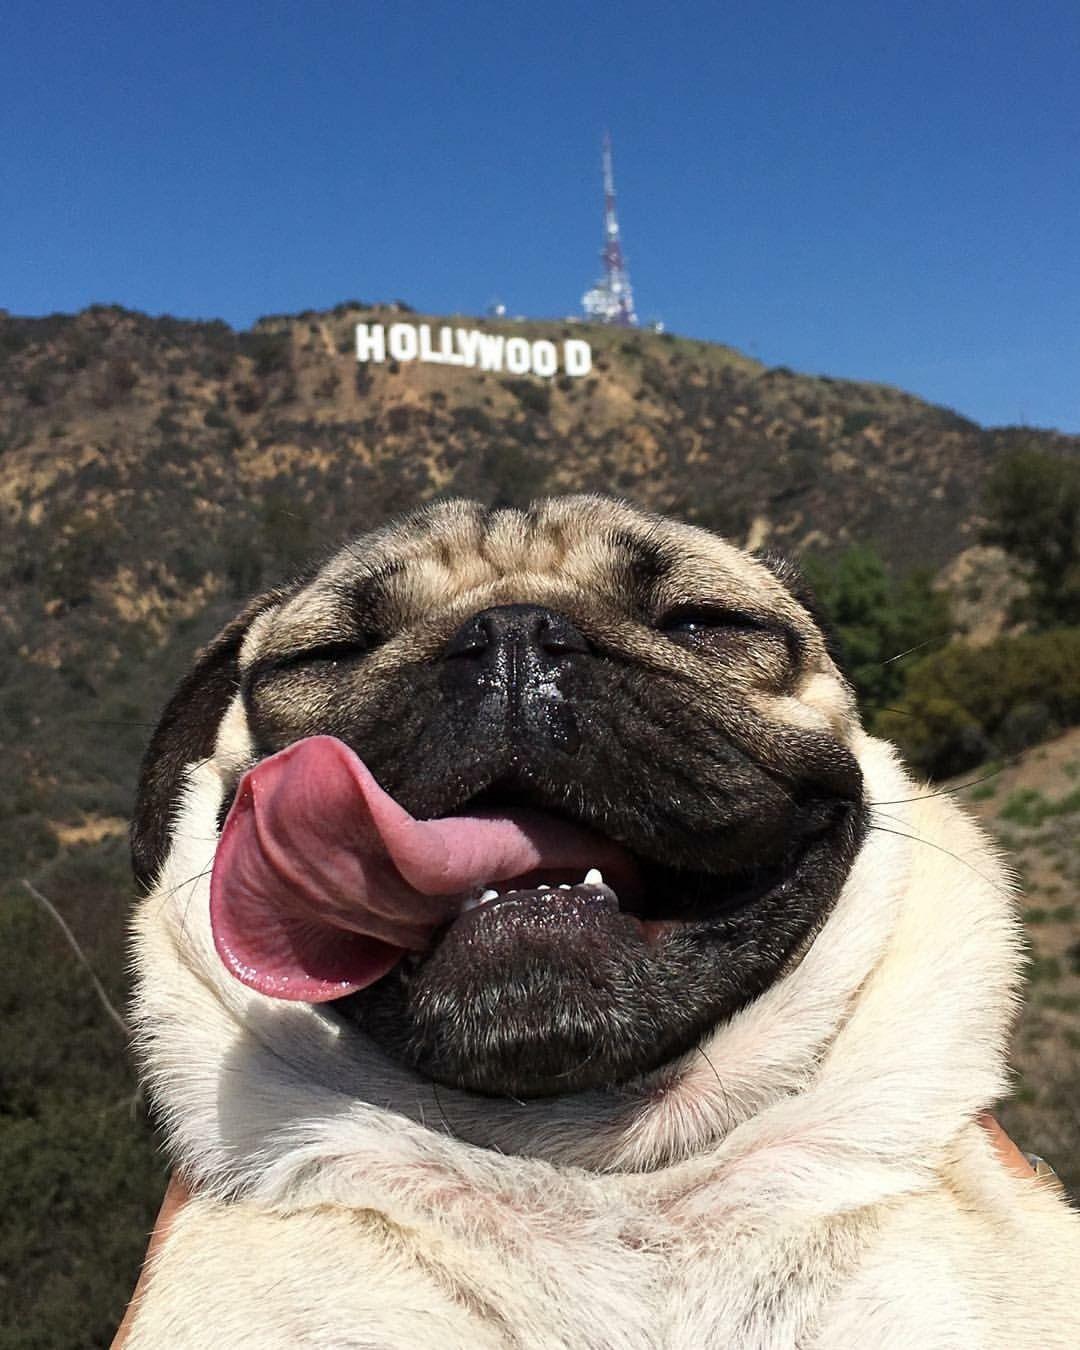 My favourite Doug the Pug selfie with the Hollywood sign x